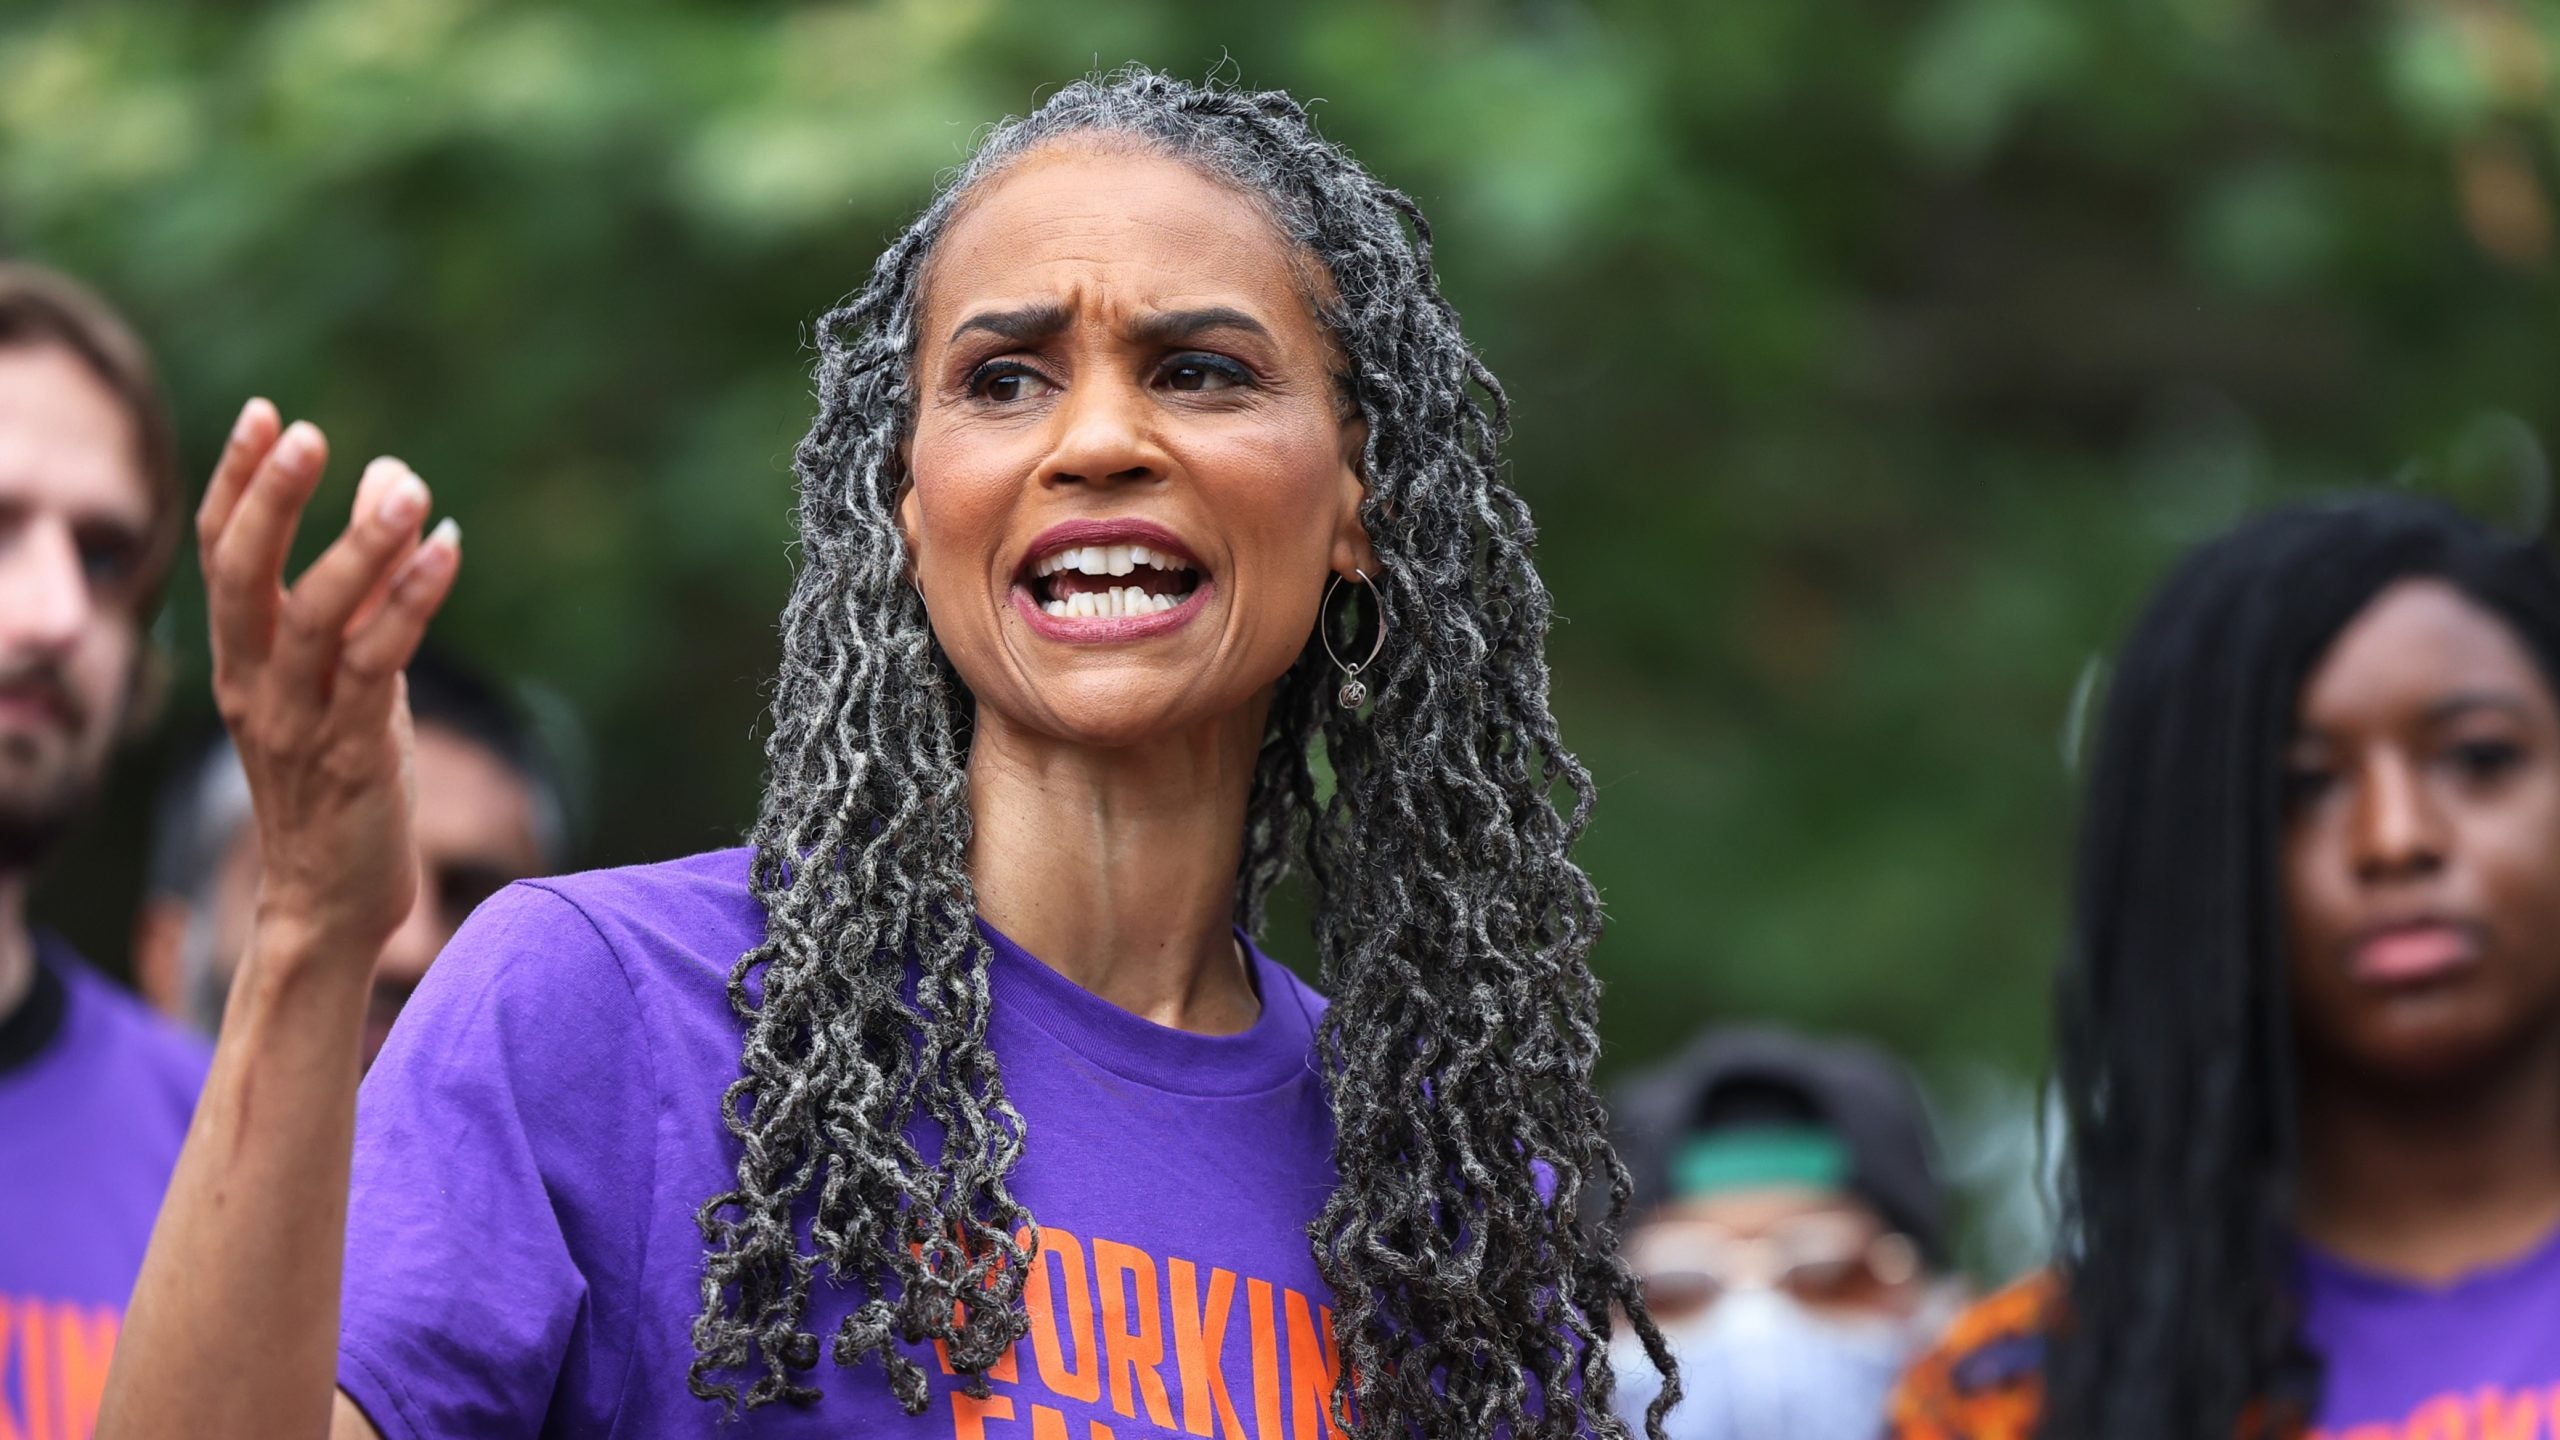 Maya Wiley Could Become New York City’s First Woman Mayor